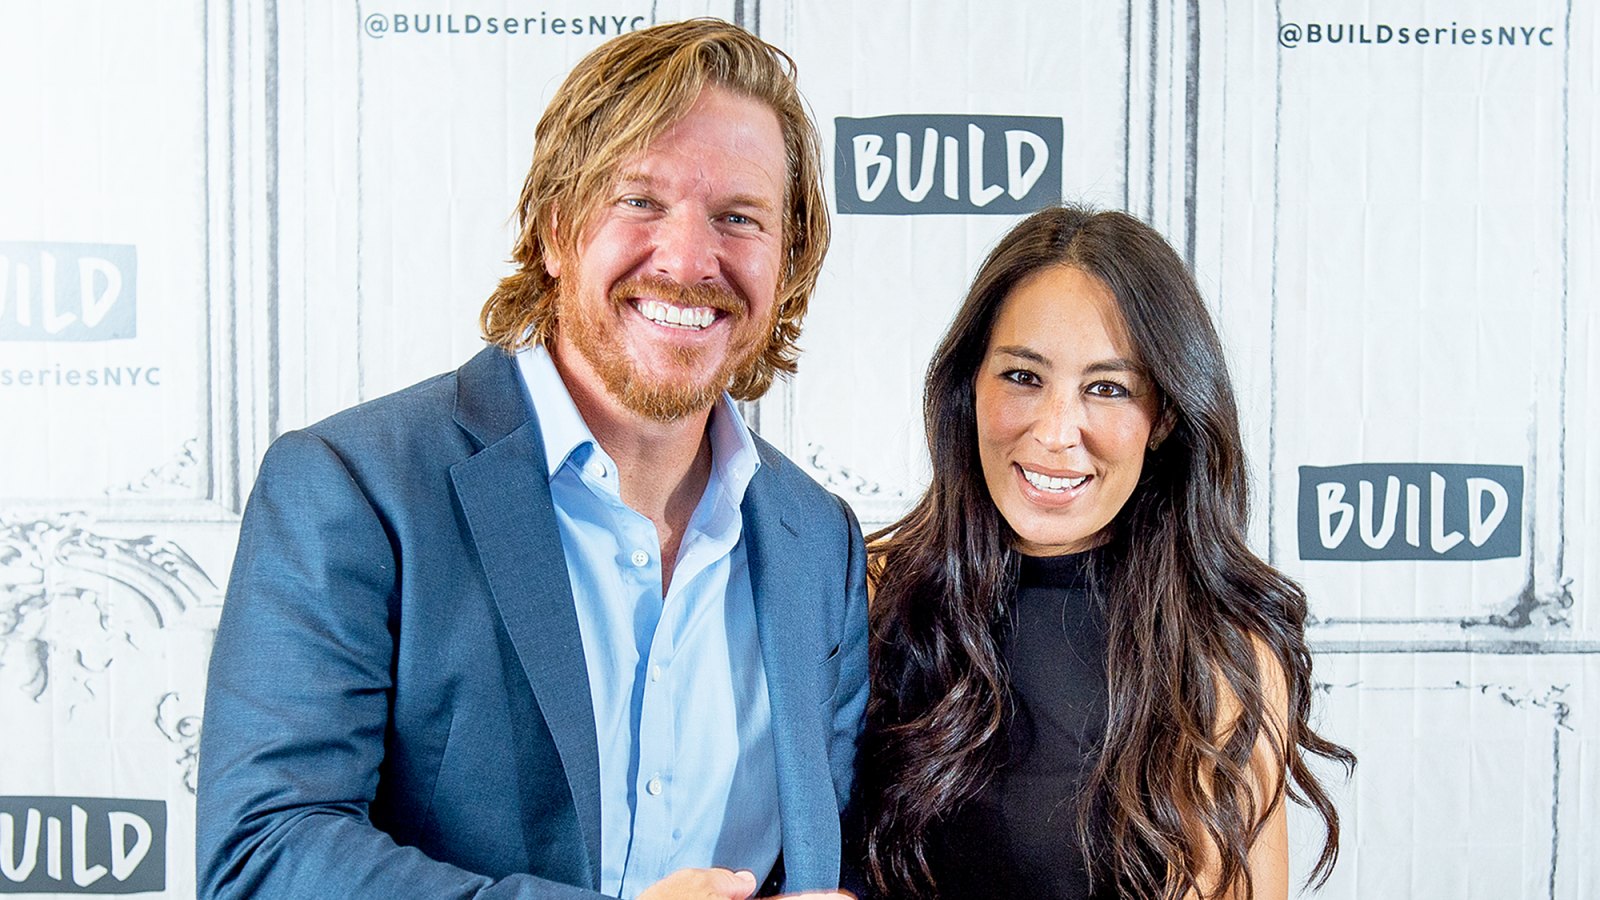 Chip Gaines and Joanna Gaines at the Build Series on October 18, 2017 in New York City.